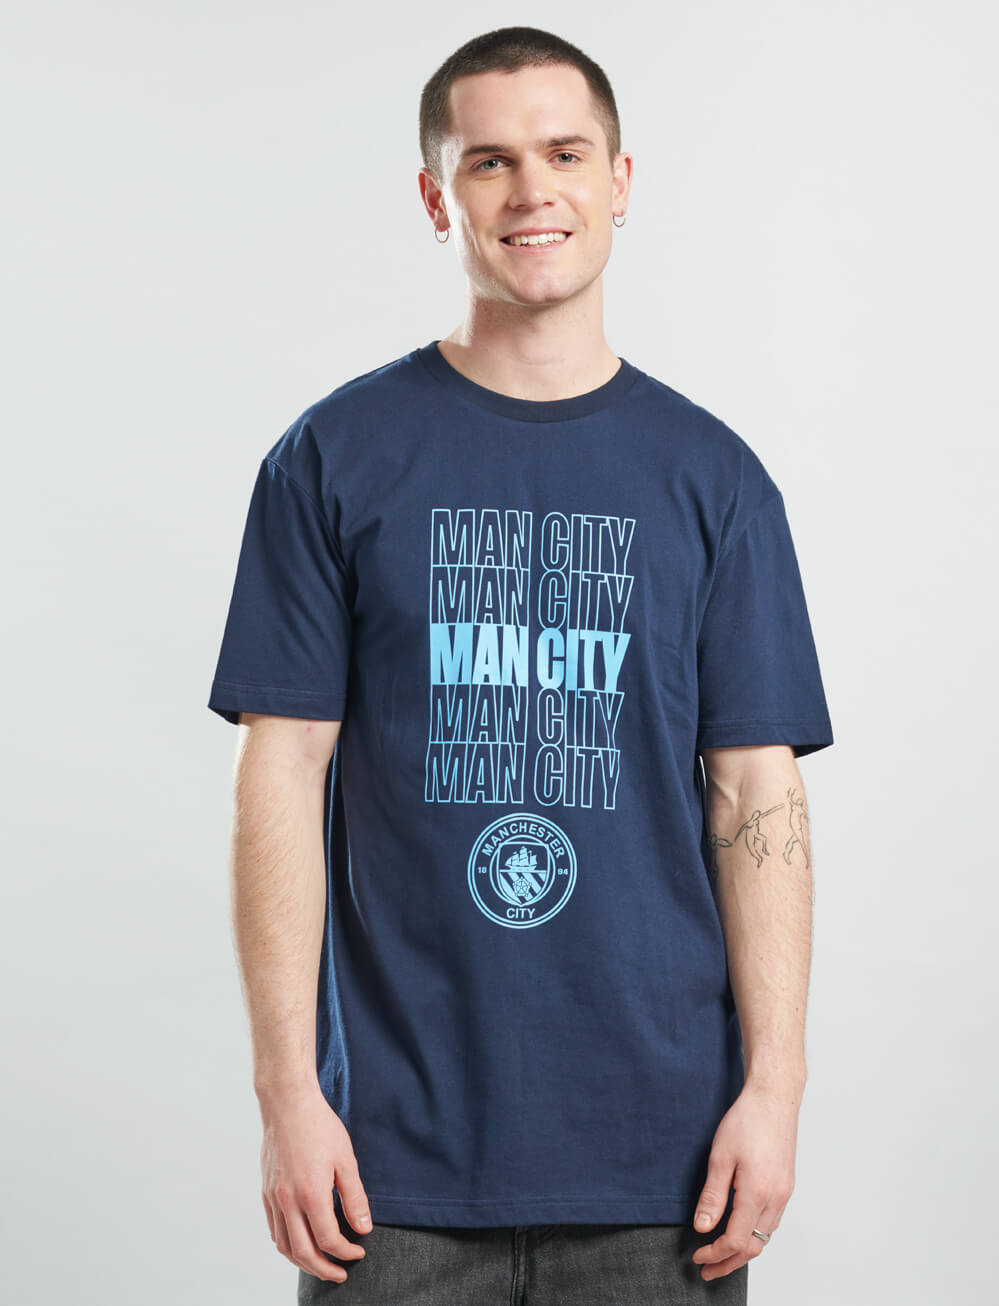 Official Manchester City Graphic T-Shirt - Navy - The World Football Store